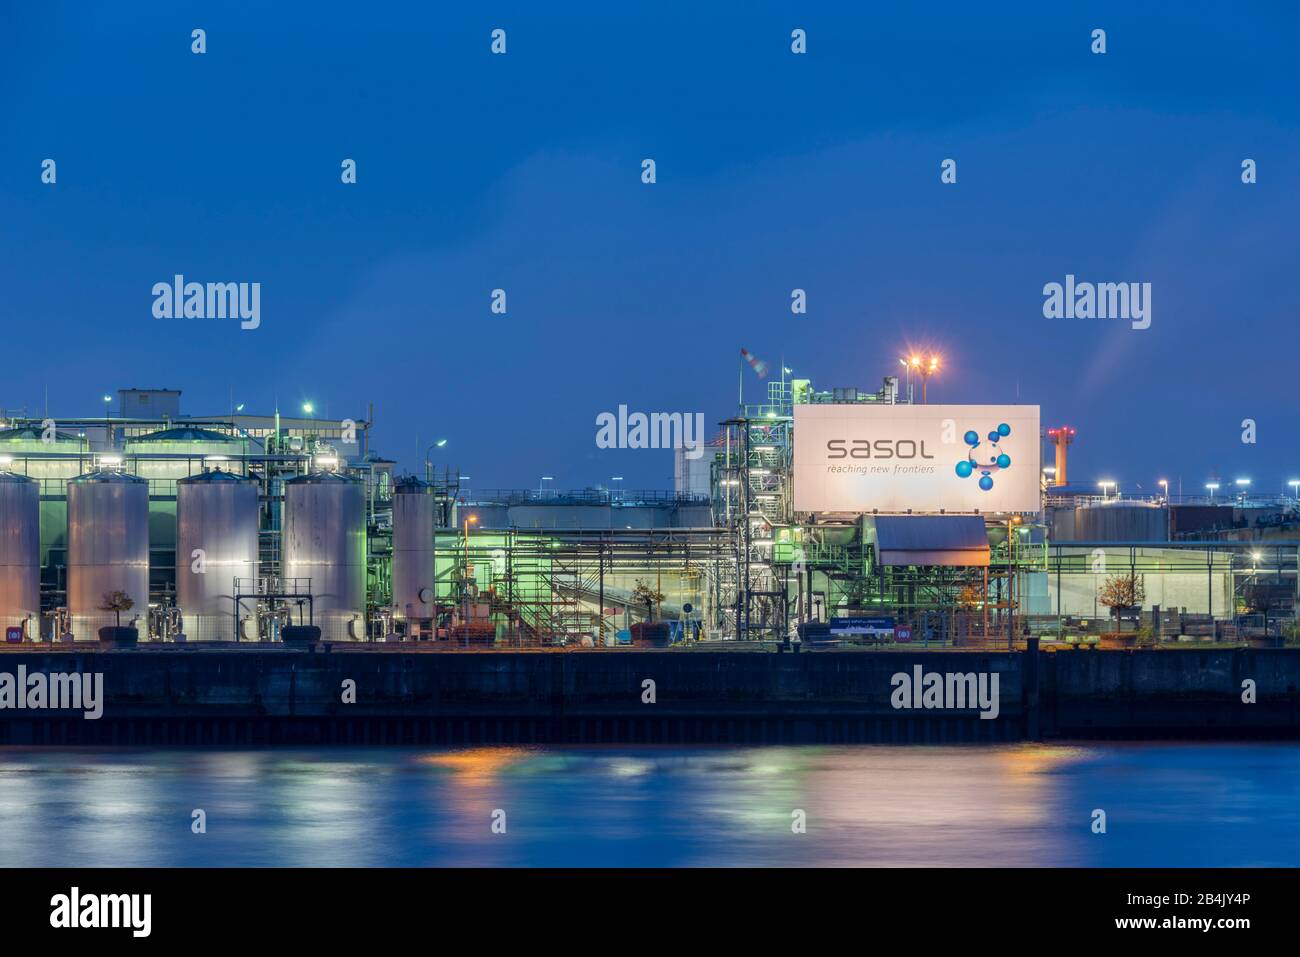 Germany, Hamburg, looking at the production facility of the South African chemical company Sasol in the Port of Hamburg, one of the world's largest manufacturers of synthetic fuels. Stock Photo